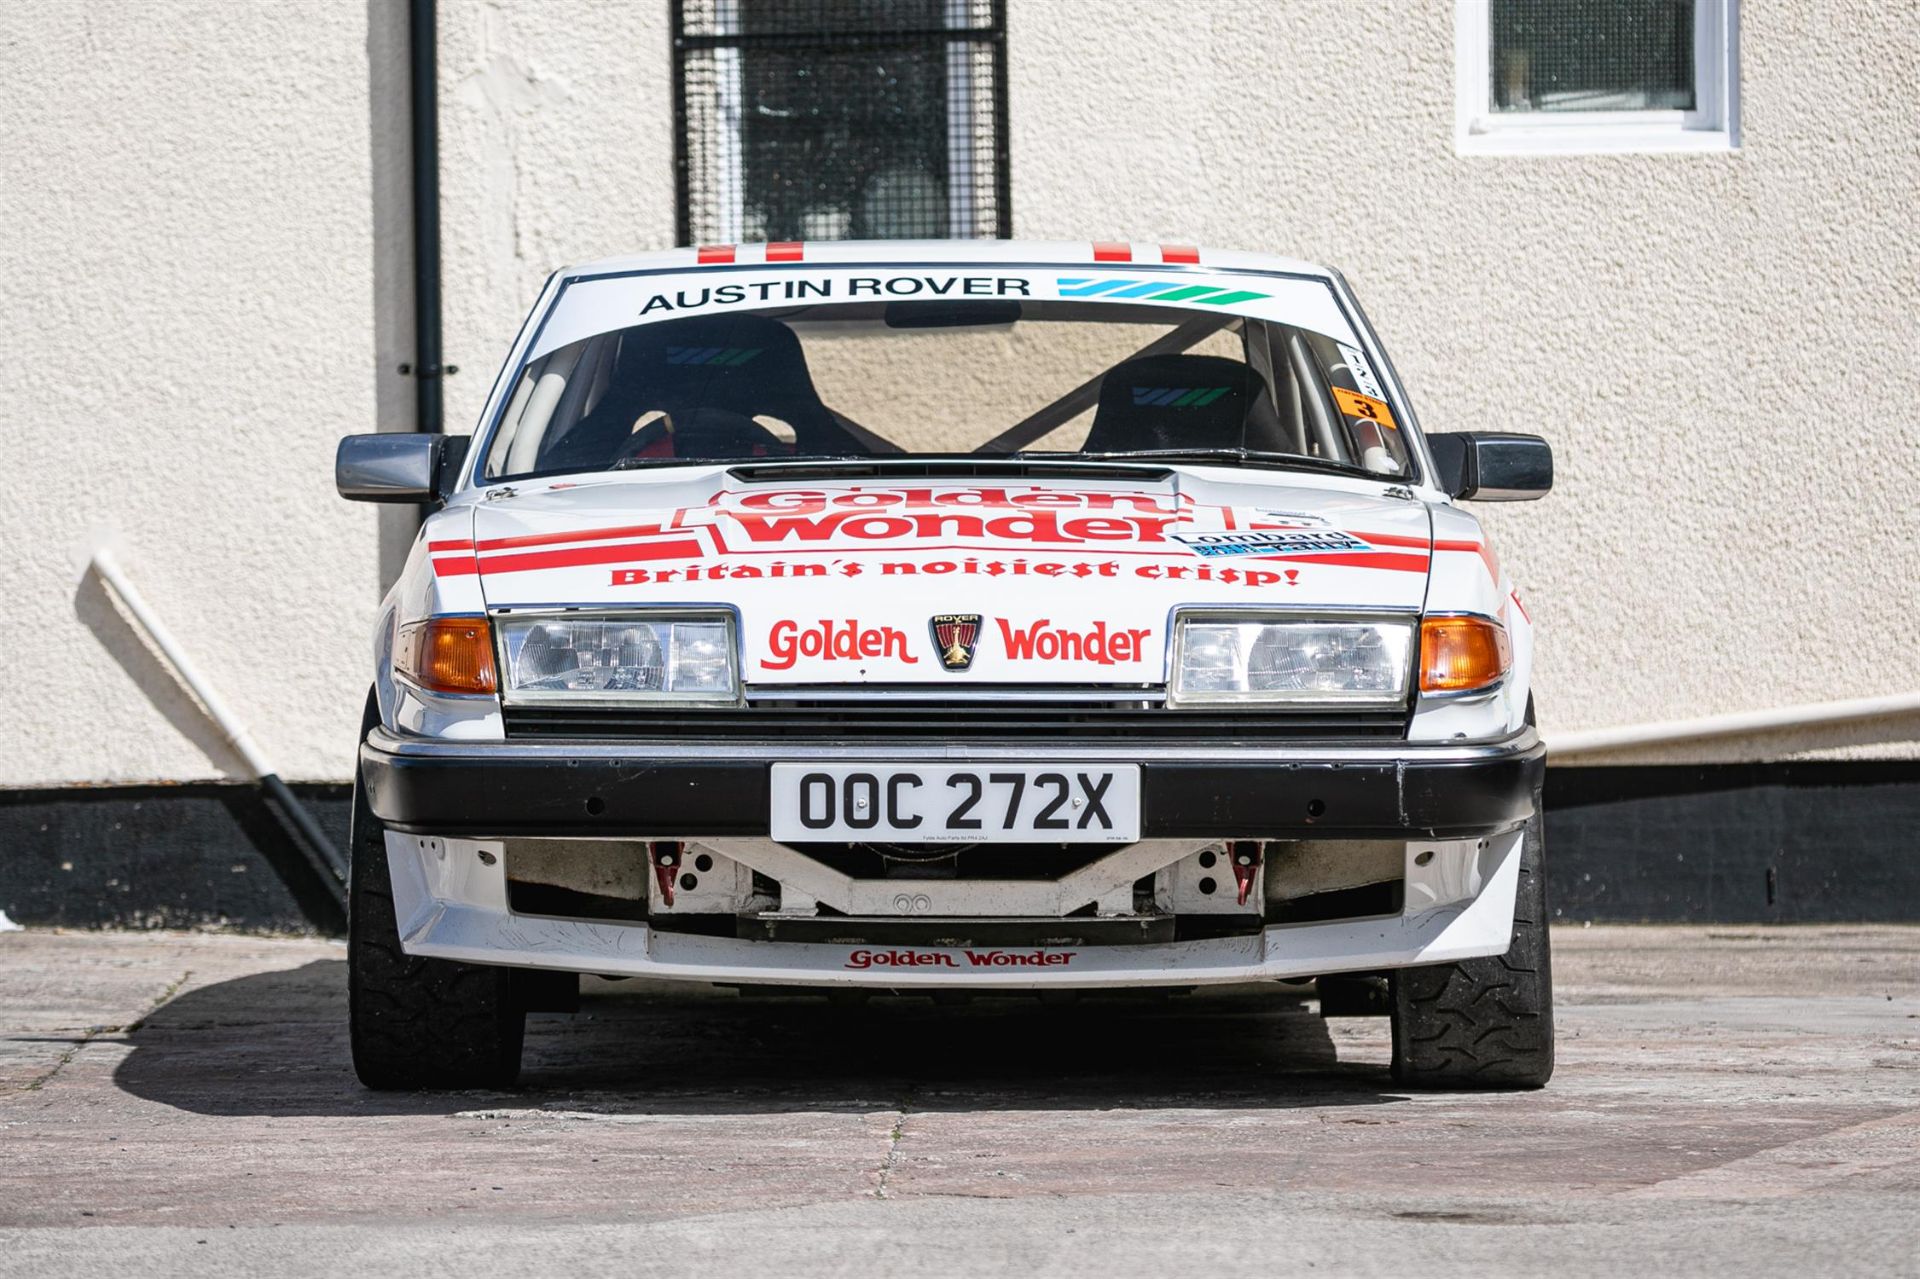 1982 Rover SD1 Vitesse 'Group A' Works Rally Car - Image 6 of 10